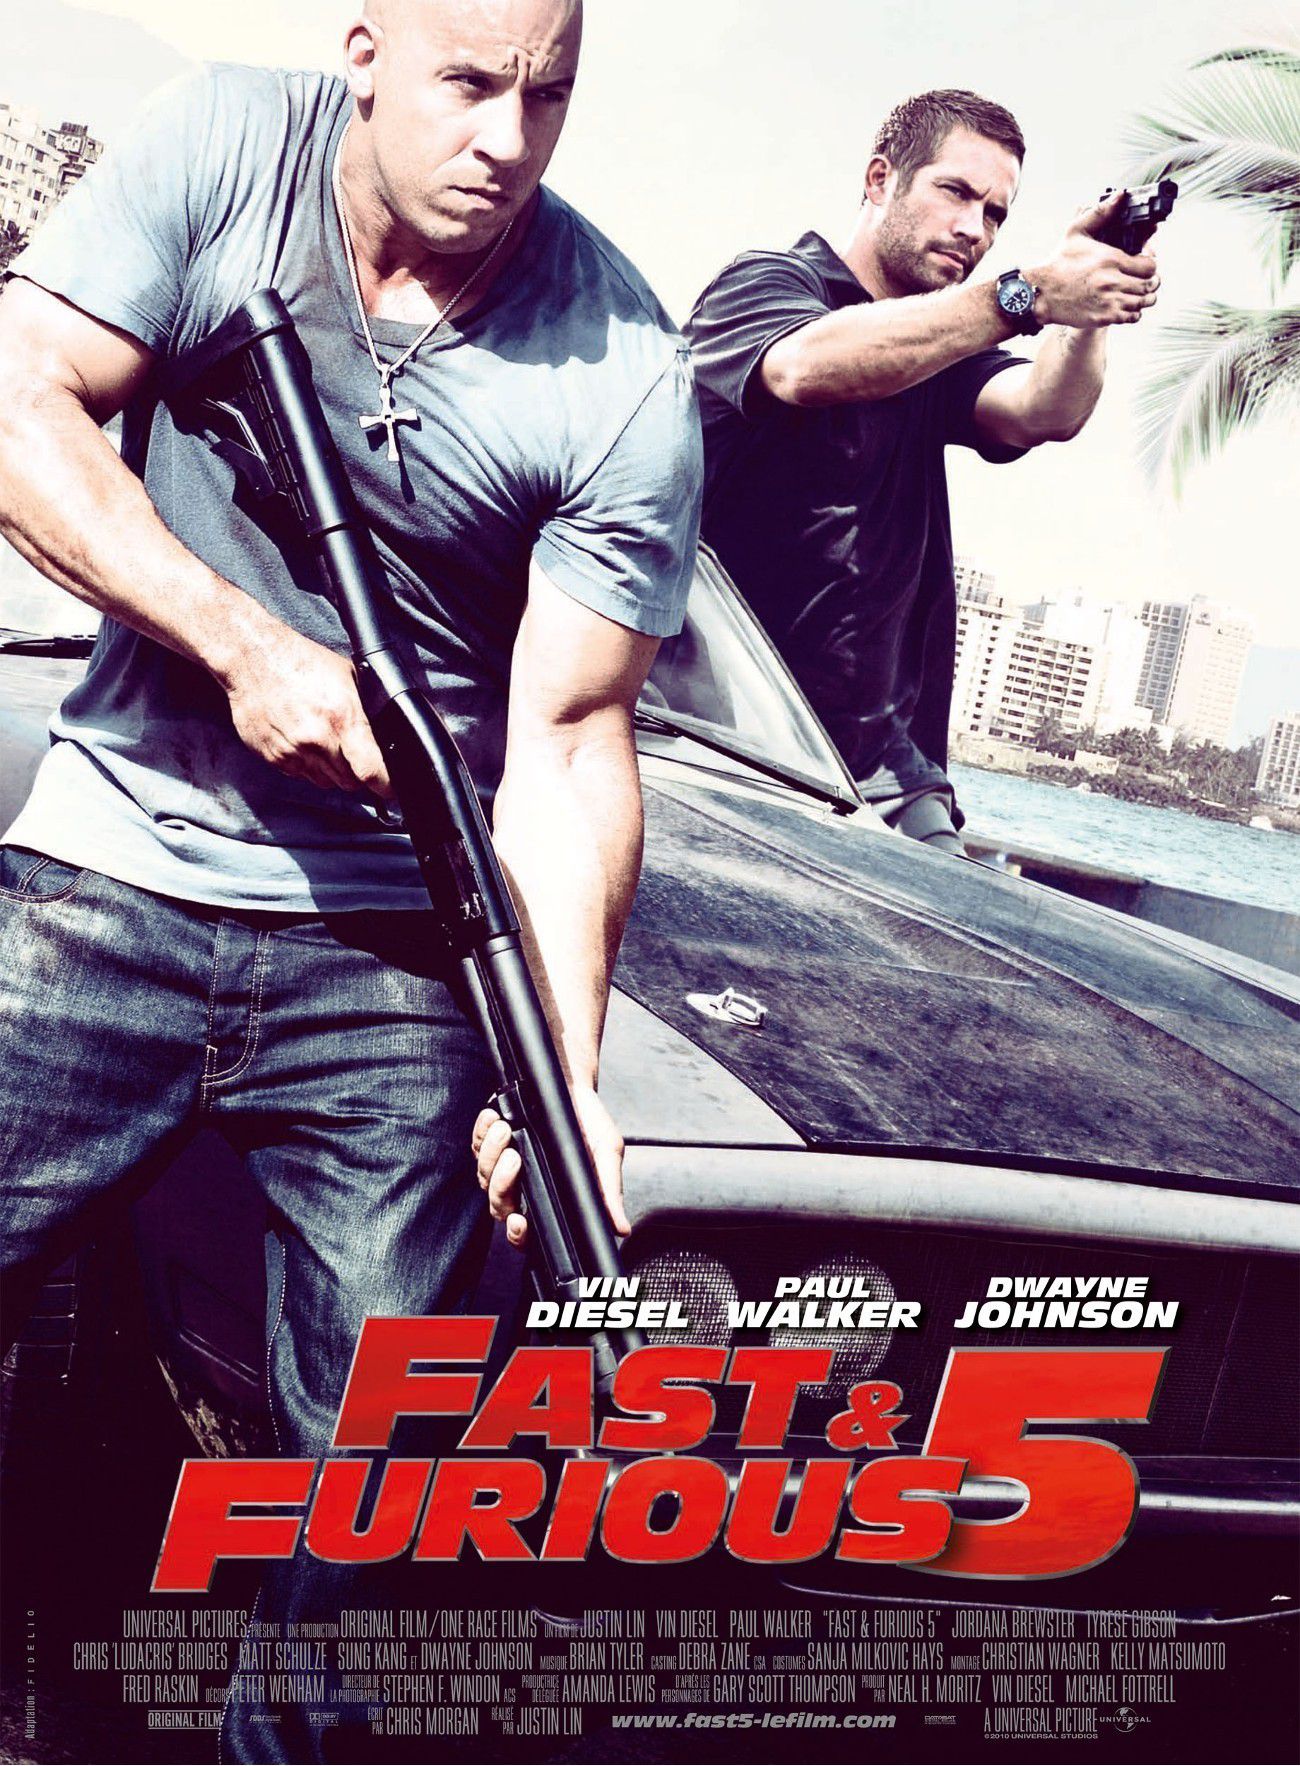 Fast & Furious 5 - Film (2011) streaming VF gratuit complet